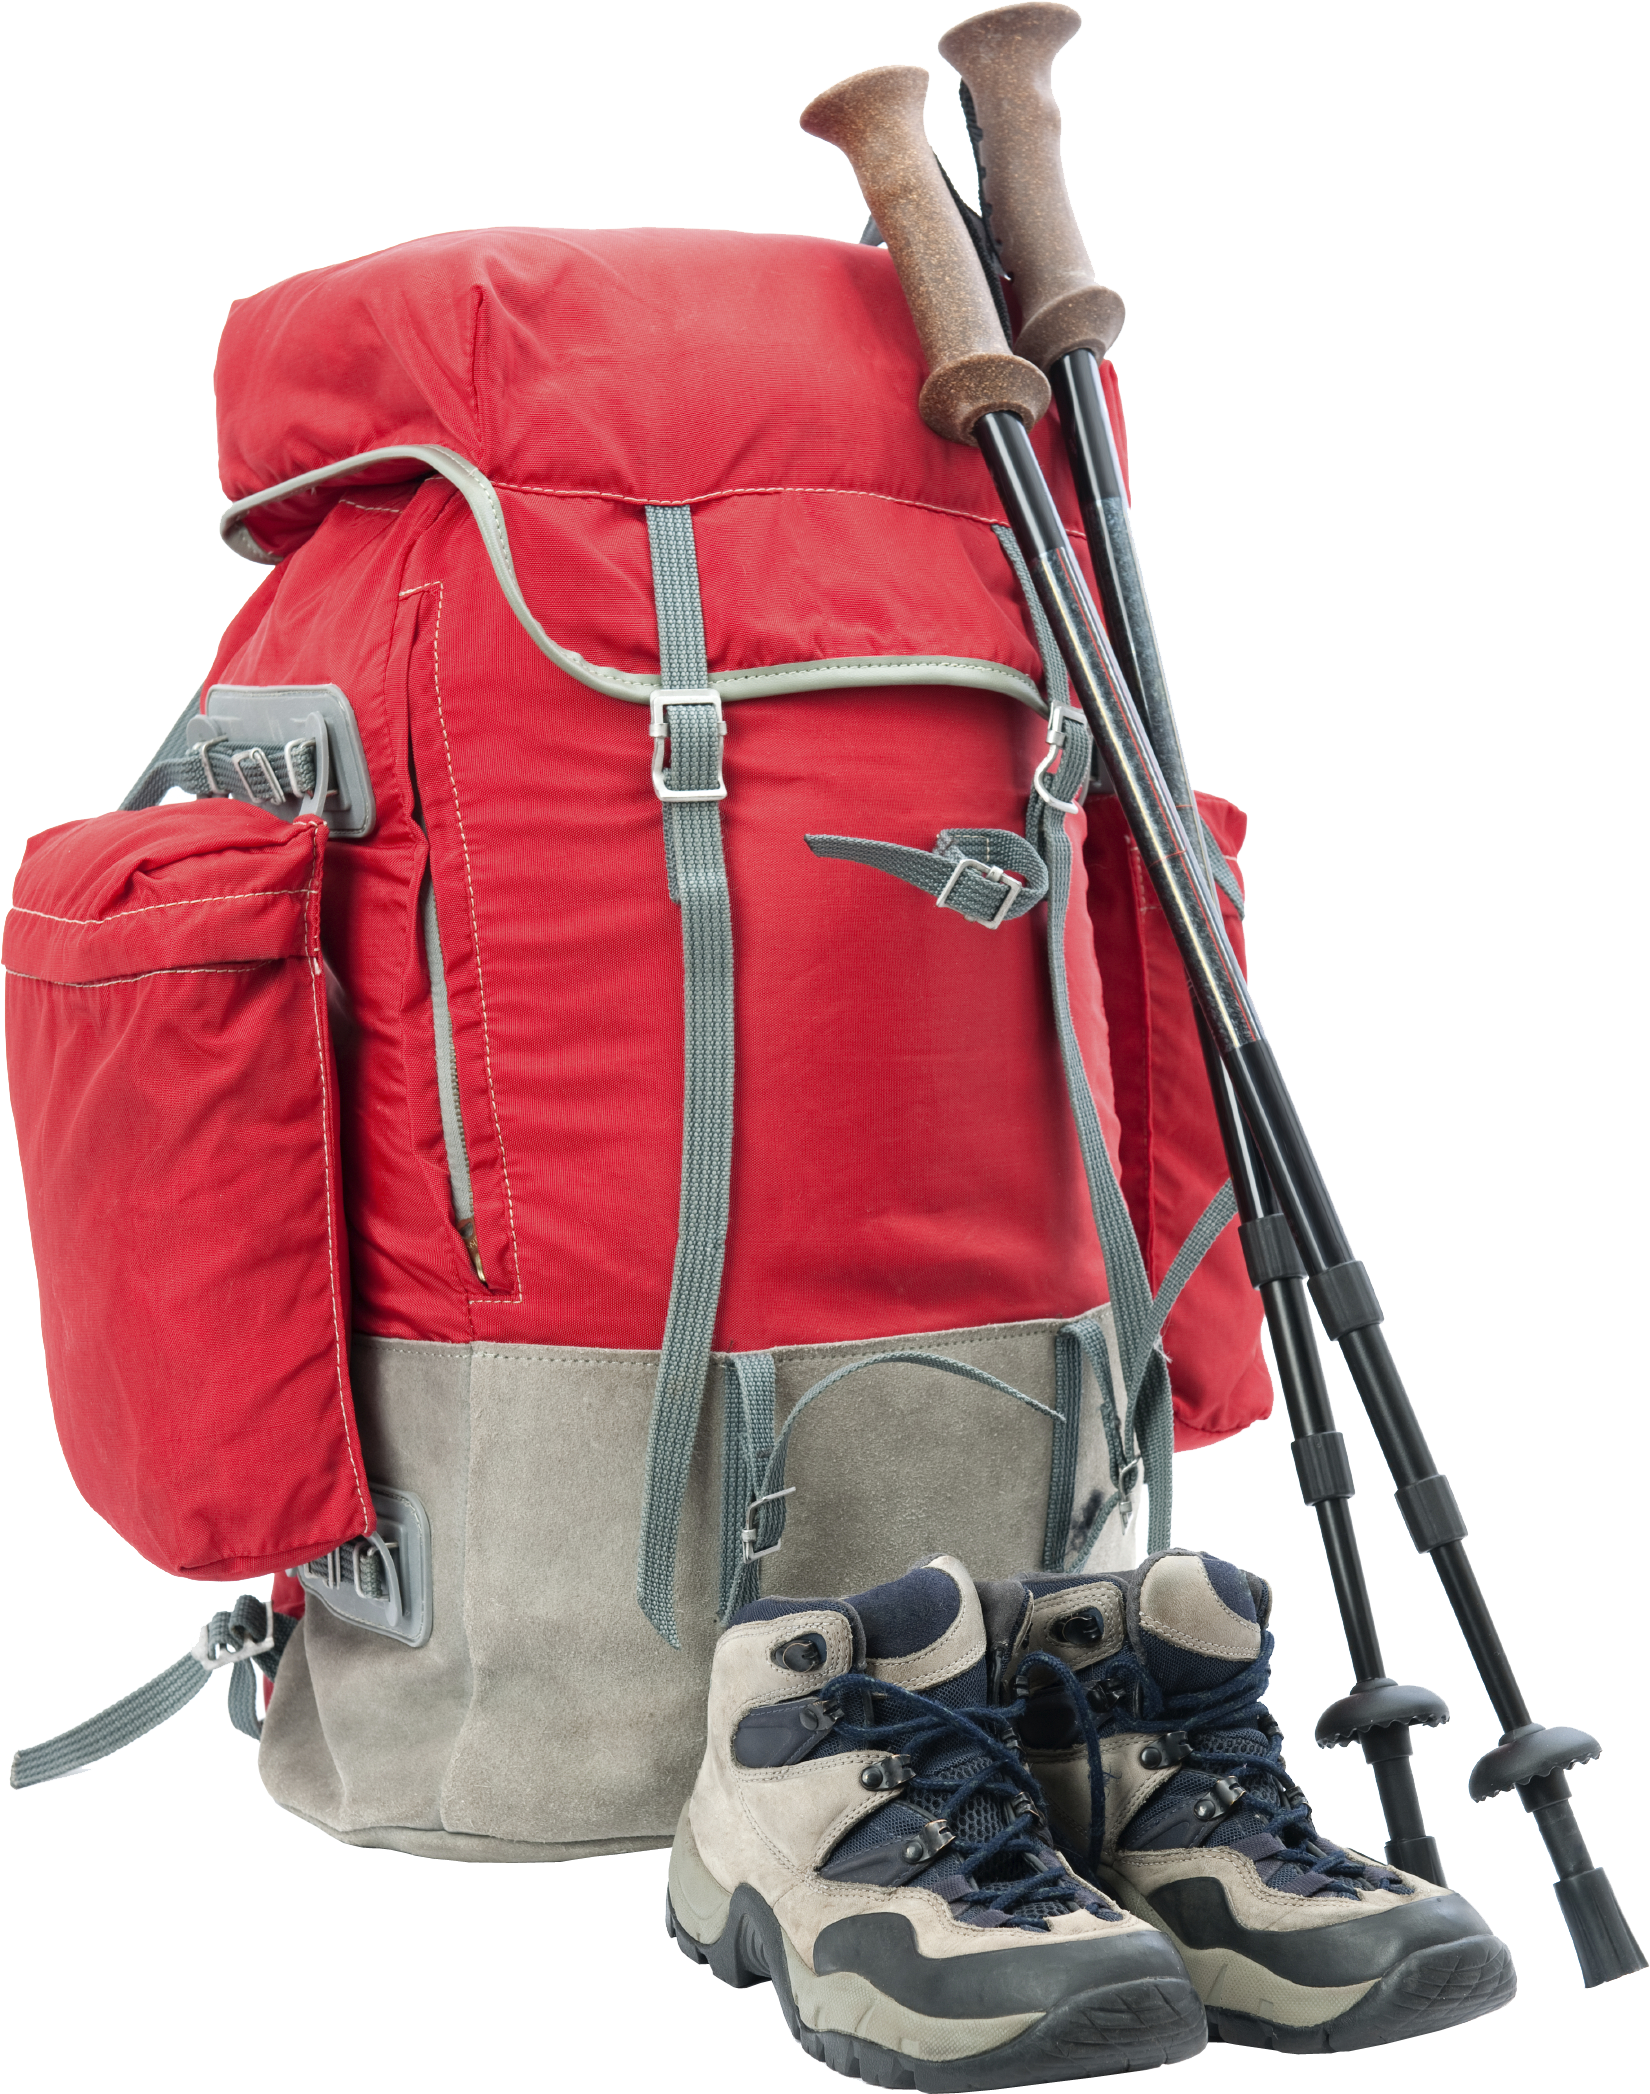 Rote Sports Rucksack PNG-Datei